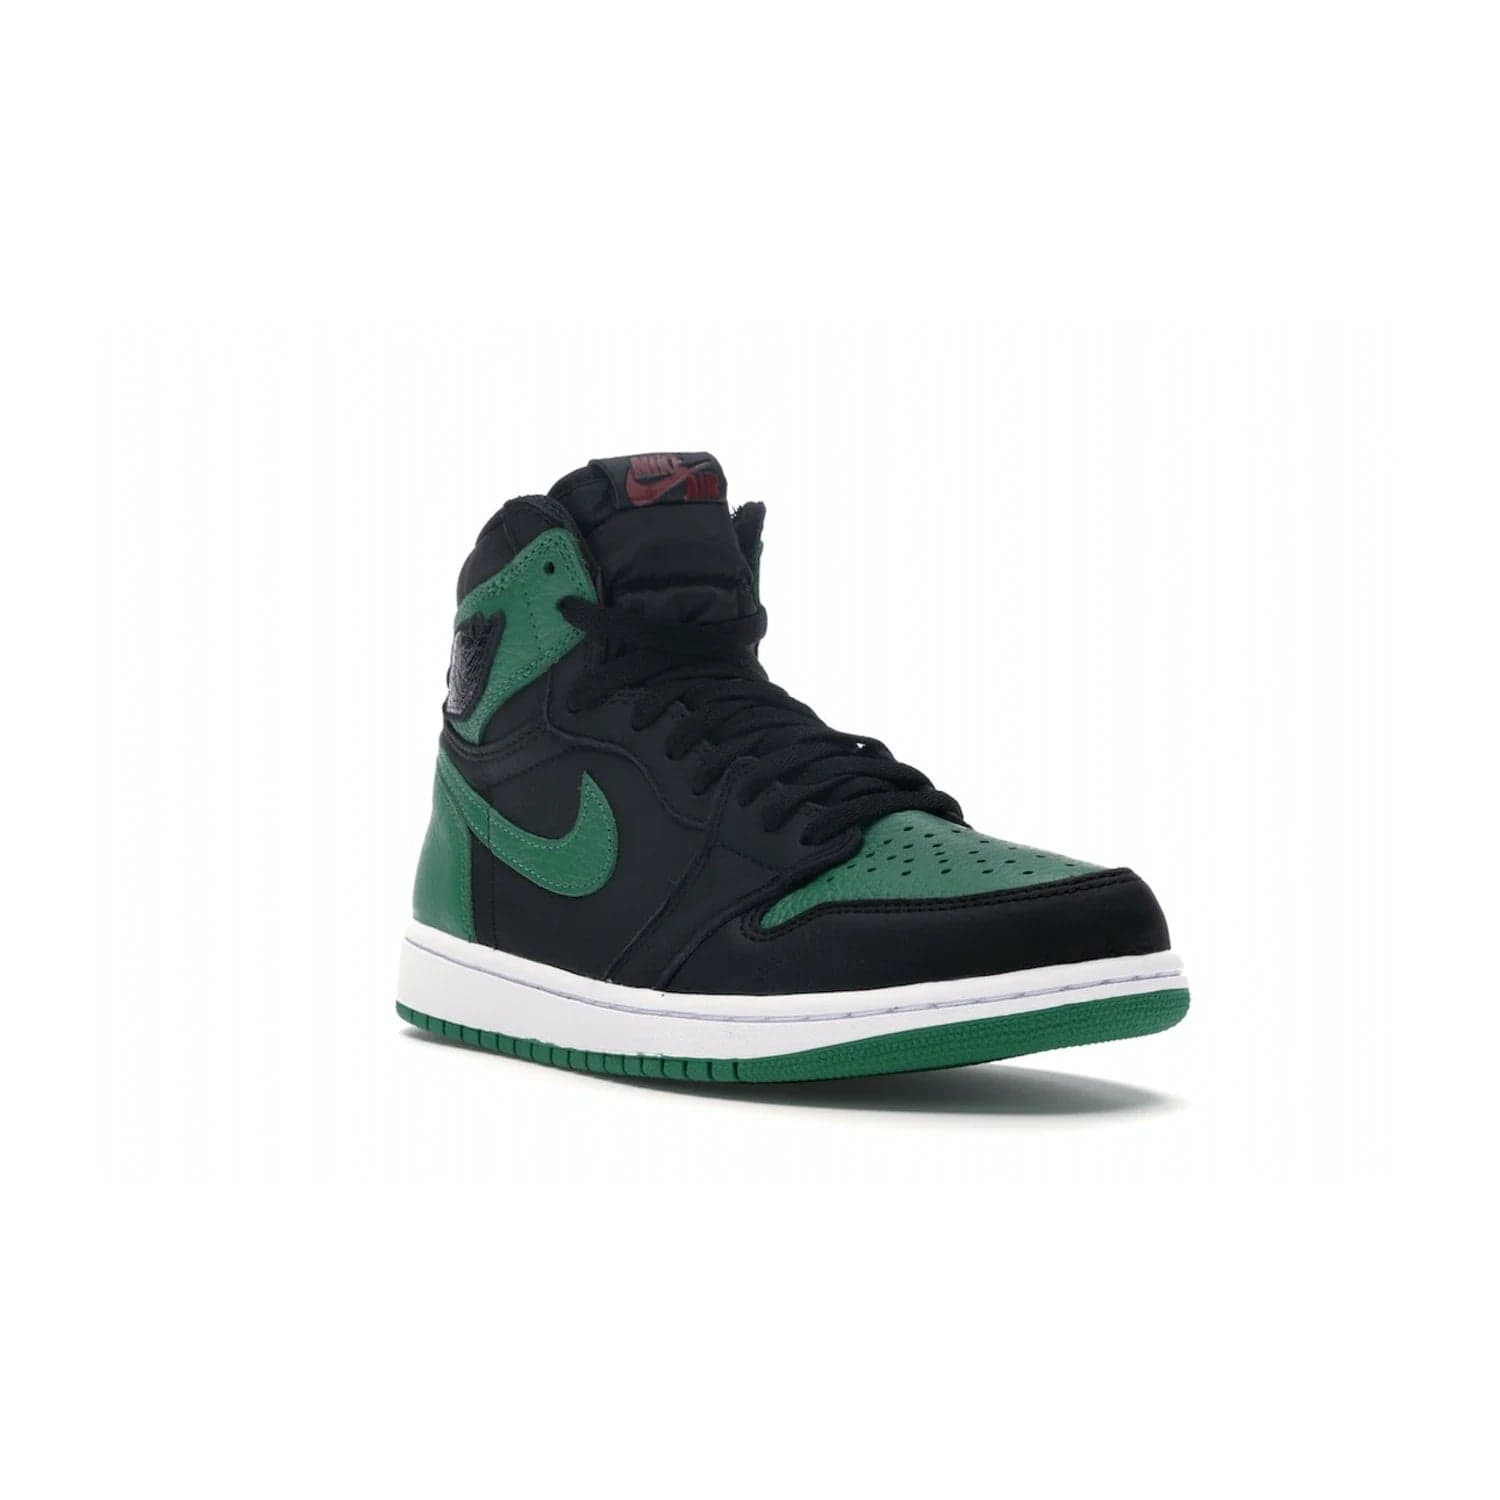 Jordan 1 Retro High Pine Green Black - Image 6 - Only at www.BallersClubKickz.com - Step into fresh style with the Jordan 1 Retro High Pine Green Black. Combining a black tumbled leather upper with green leather overlays, this sneaker features a Gym Red embroidered tongue tag, sail midsole, and pine green outsole for iconic style with a unique twist.